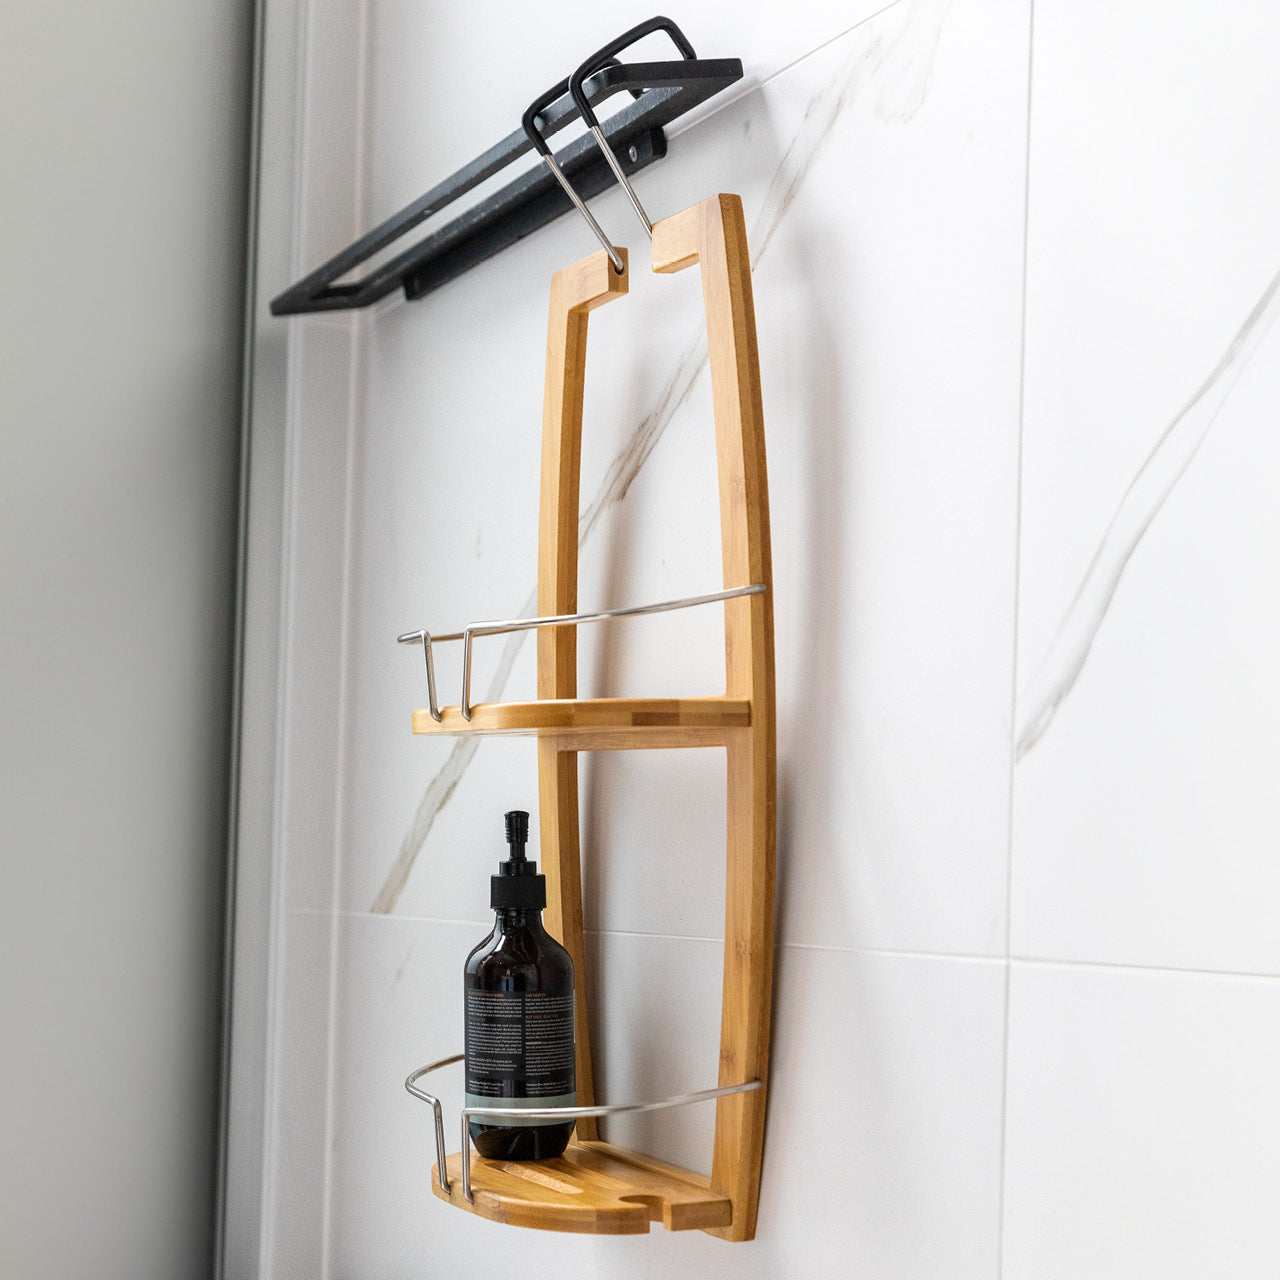 Bamboo Shower Caddy in shower with soap inside